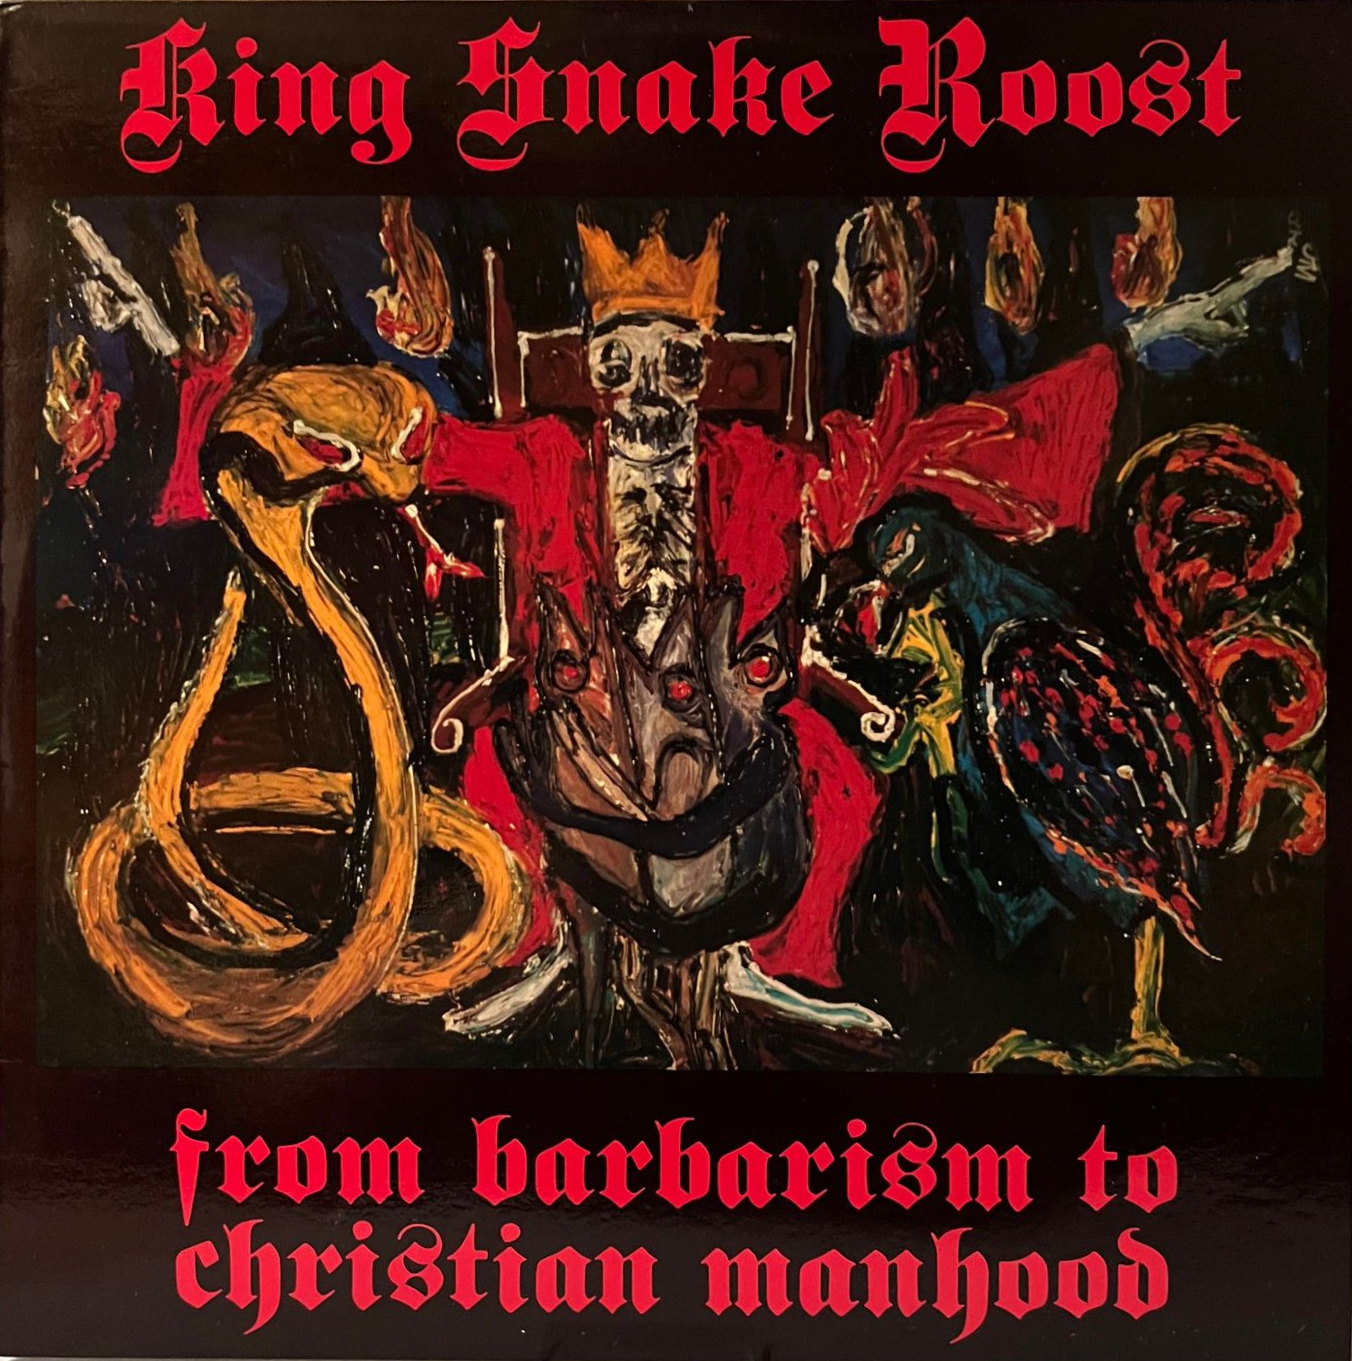 KING SNAKE ROOST - FROM BARBARISM TO CHRISTIAN MANHOOD